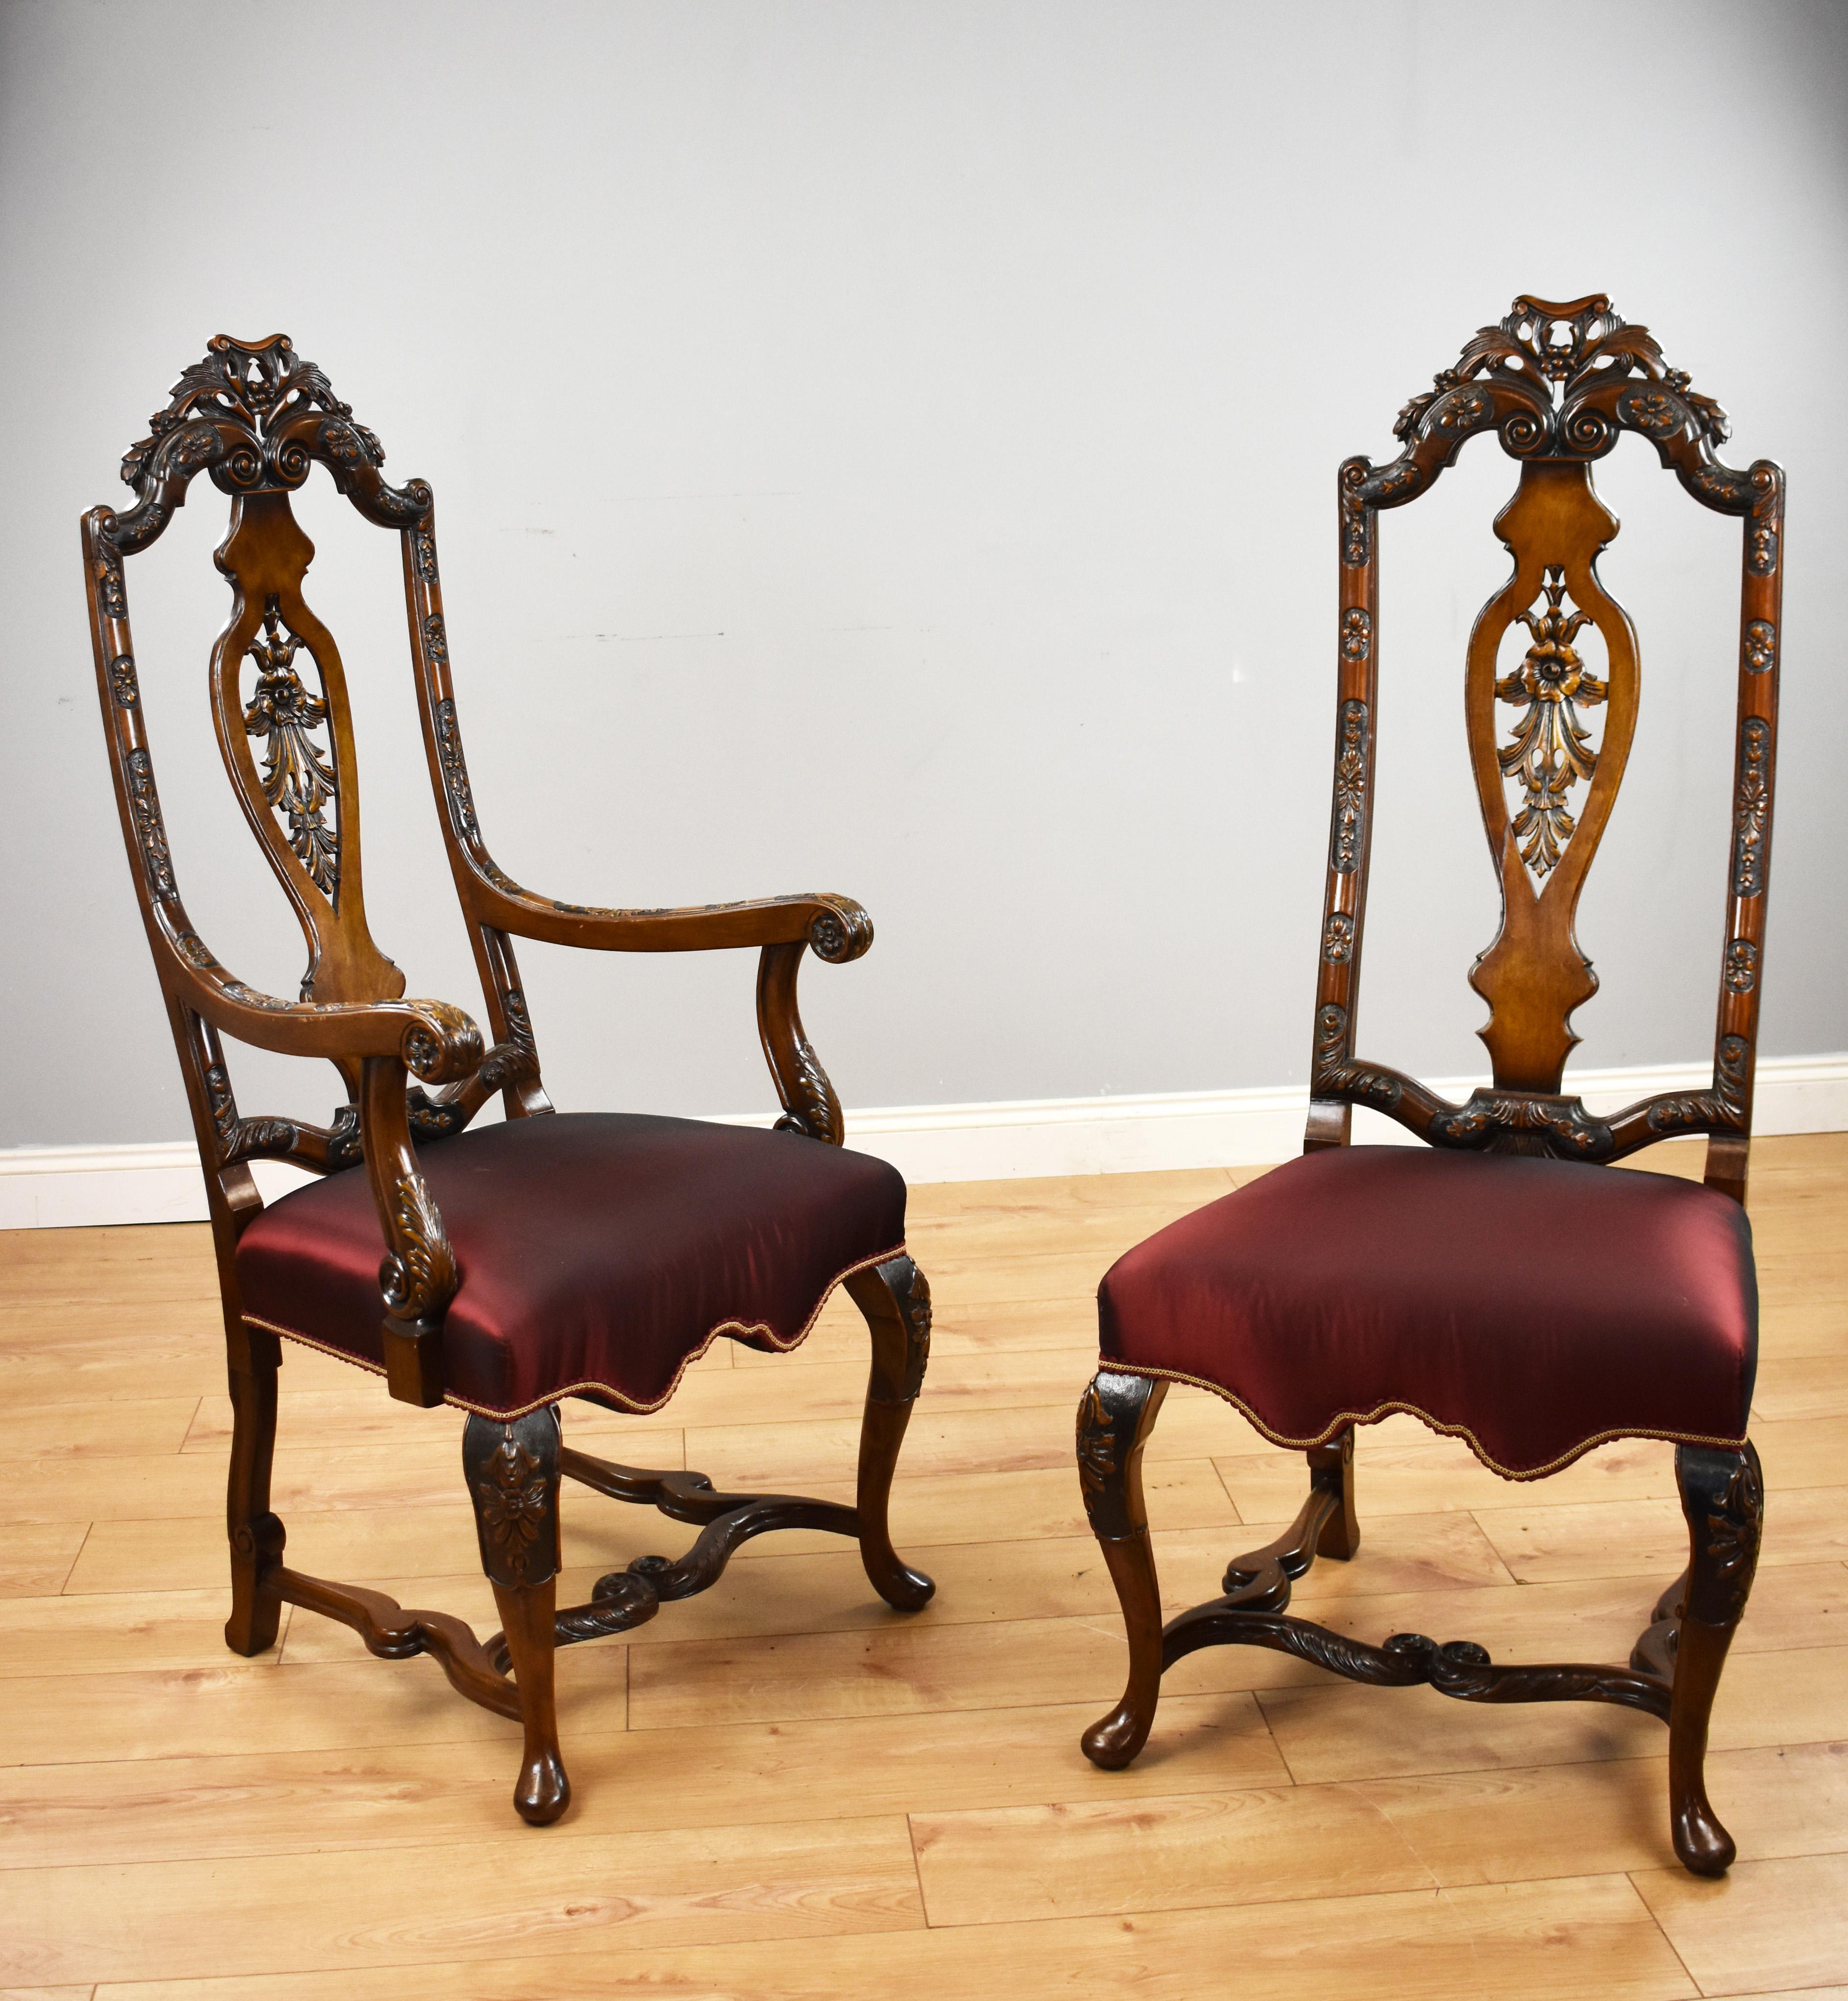 For sale is a good quality set of 14 Queen Anne style dining chairs, each having high backs with carving to the top, standing on elegantly carved cabriole legs united by an ornately shaped and carved stretcher. Each chair is in good condition,